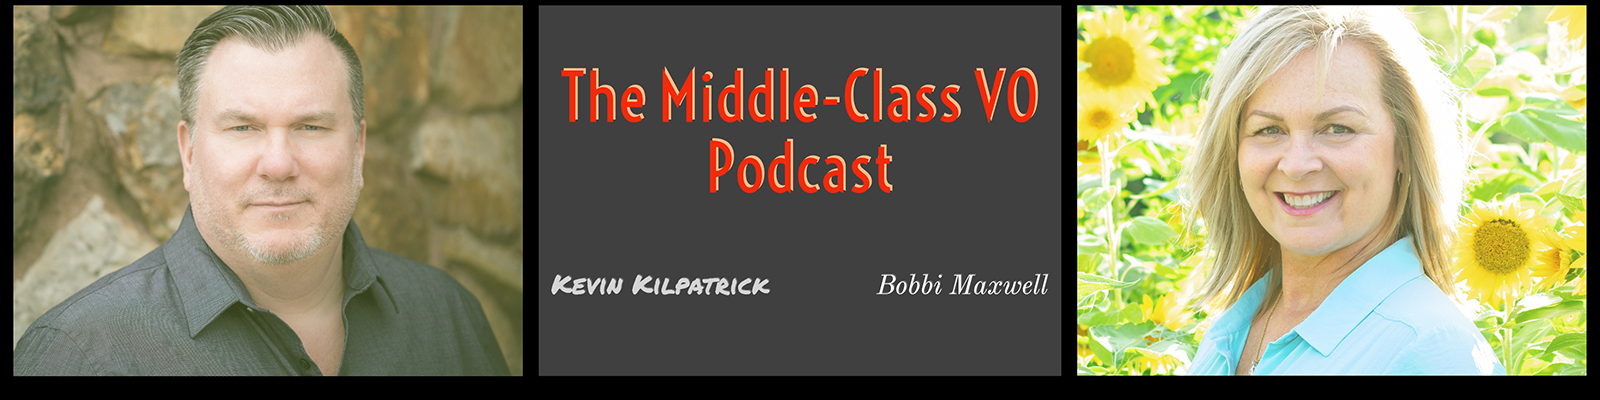 The Middle-Class VO Podcast